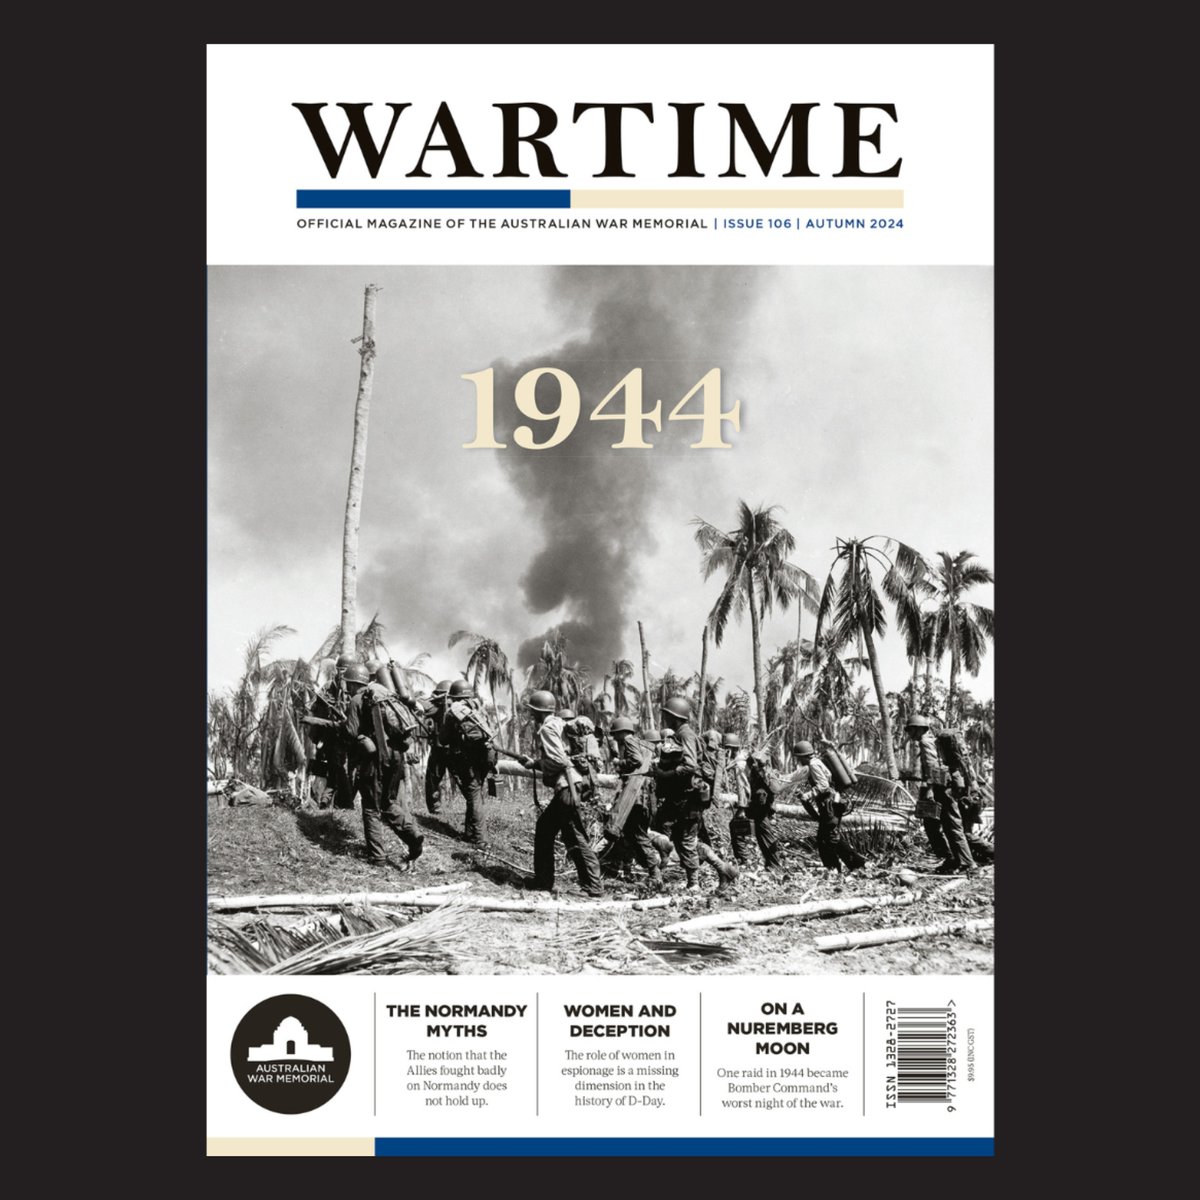 Issue 106 of Wartime magazine, ‘1944’, is out now! Purchase your copy at the Memorial Shop: brnw.ch/21wIY9n This will be the final Wartime magazine to be printed in its current format. Learn more about the upcoming changes: brnw.ch/21wIY9o